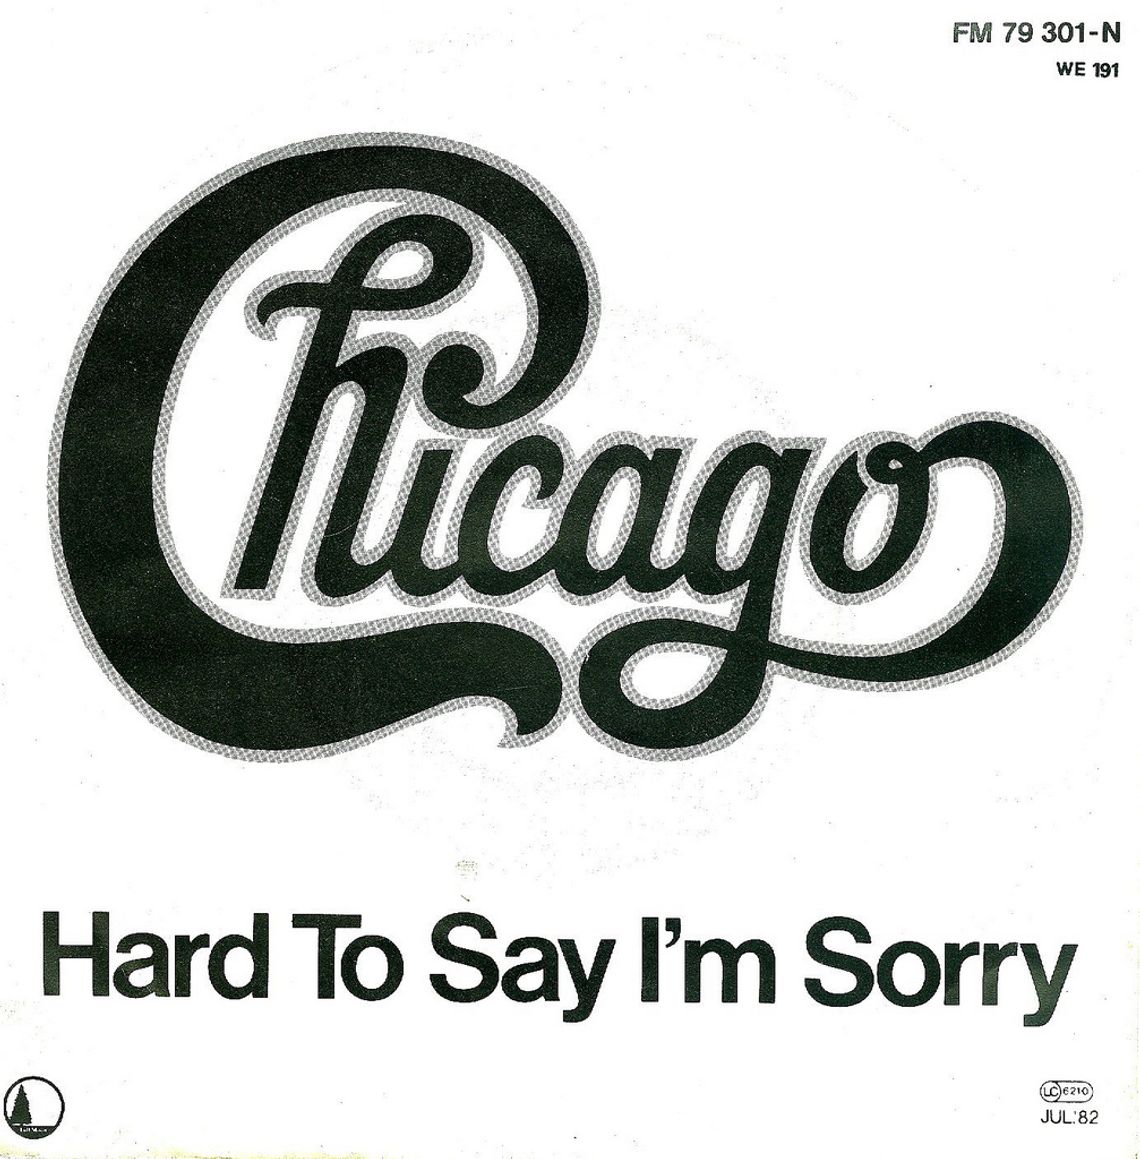 CHICAGO - HARD TO SAY I'M SORRY